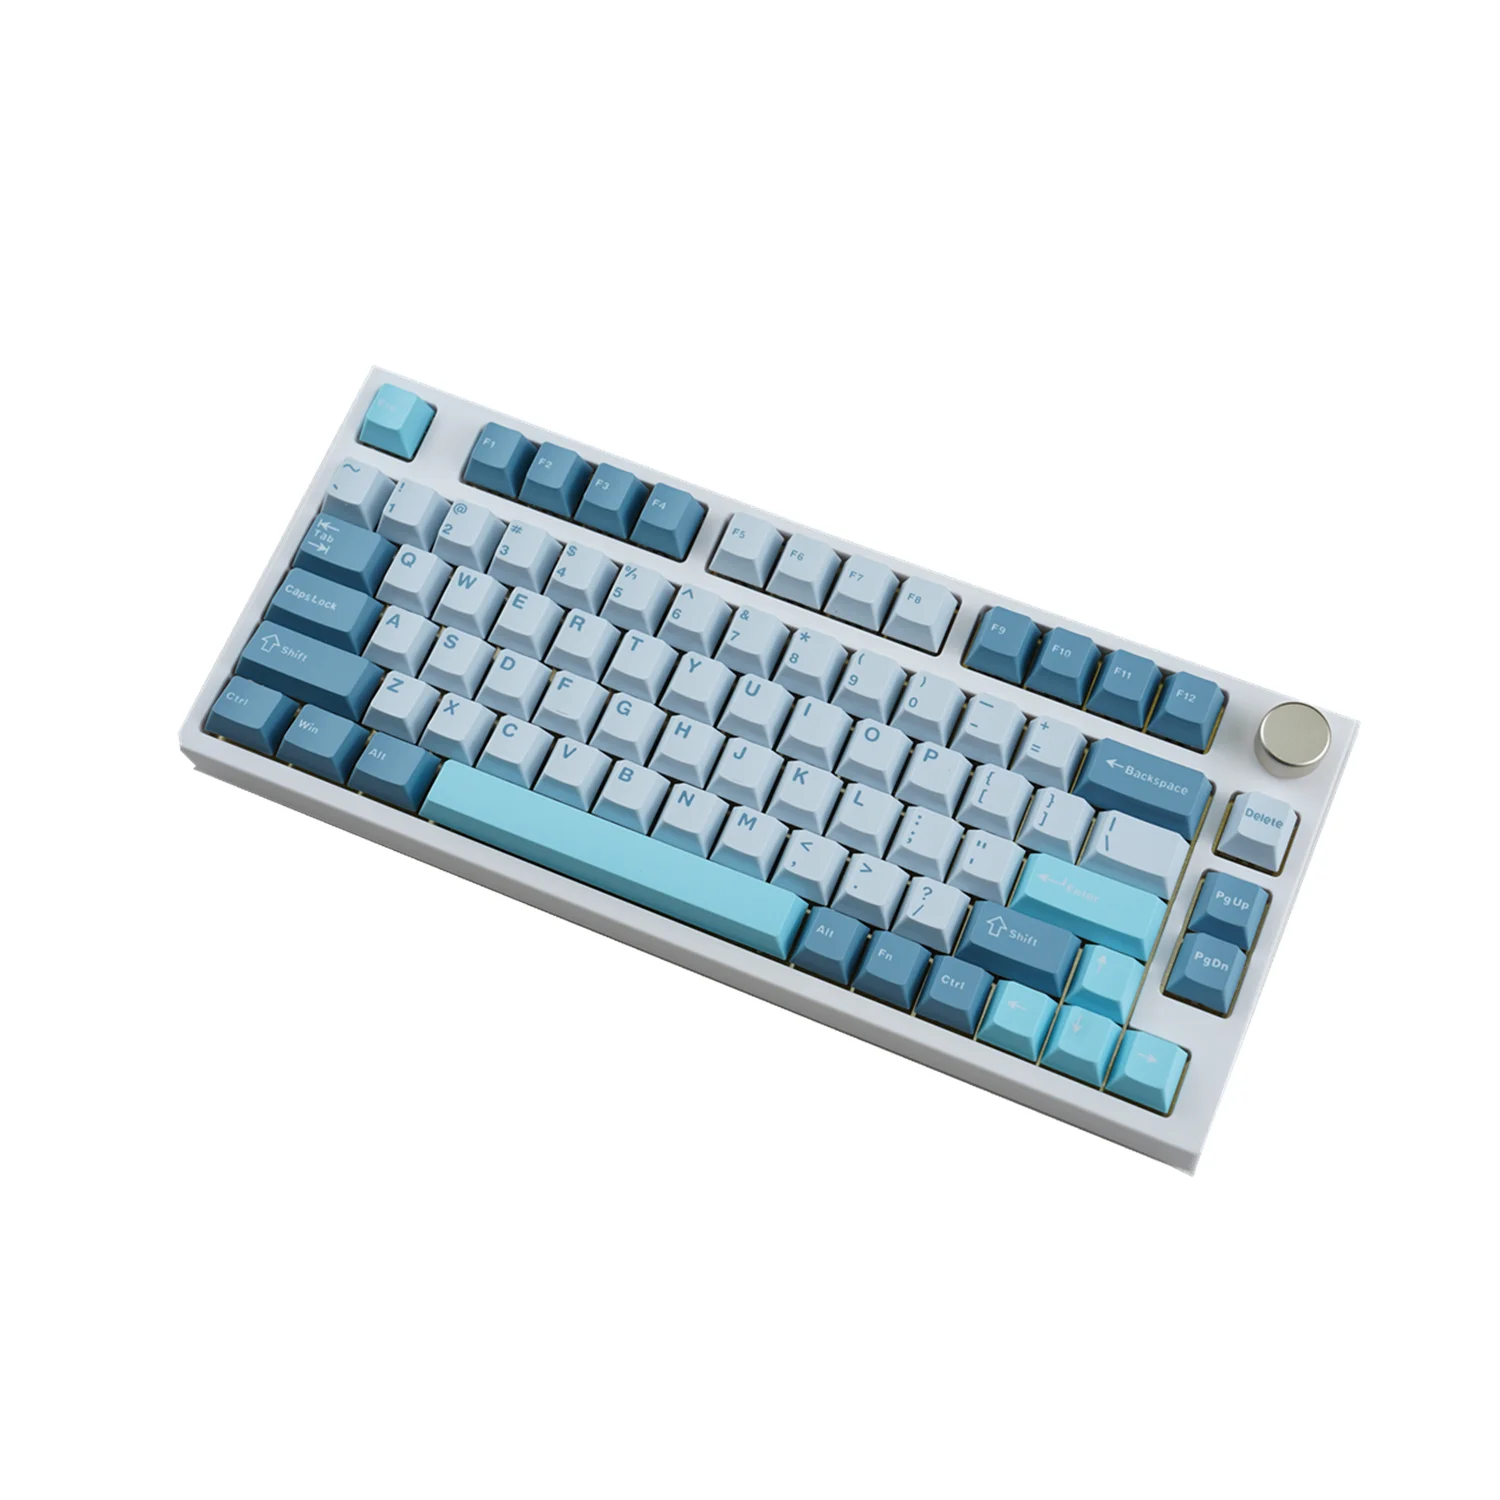 

MATHEW TECH MK80 Max Mechanical Keyboard RGB Hot-swappable Three-mode Wireless 75% Layout Linear Switch for Game/Office